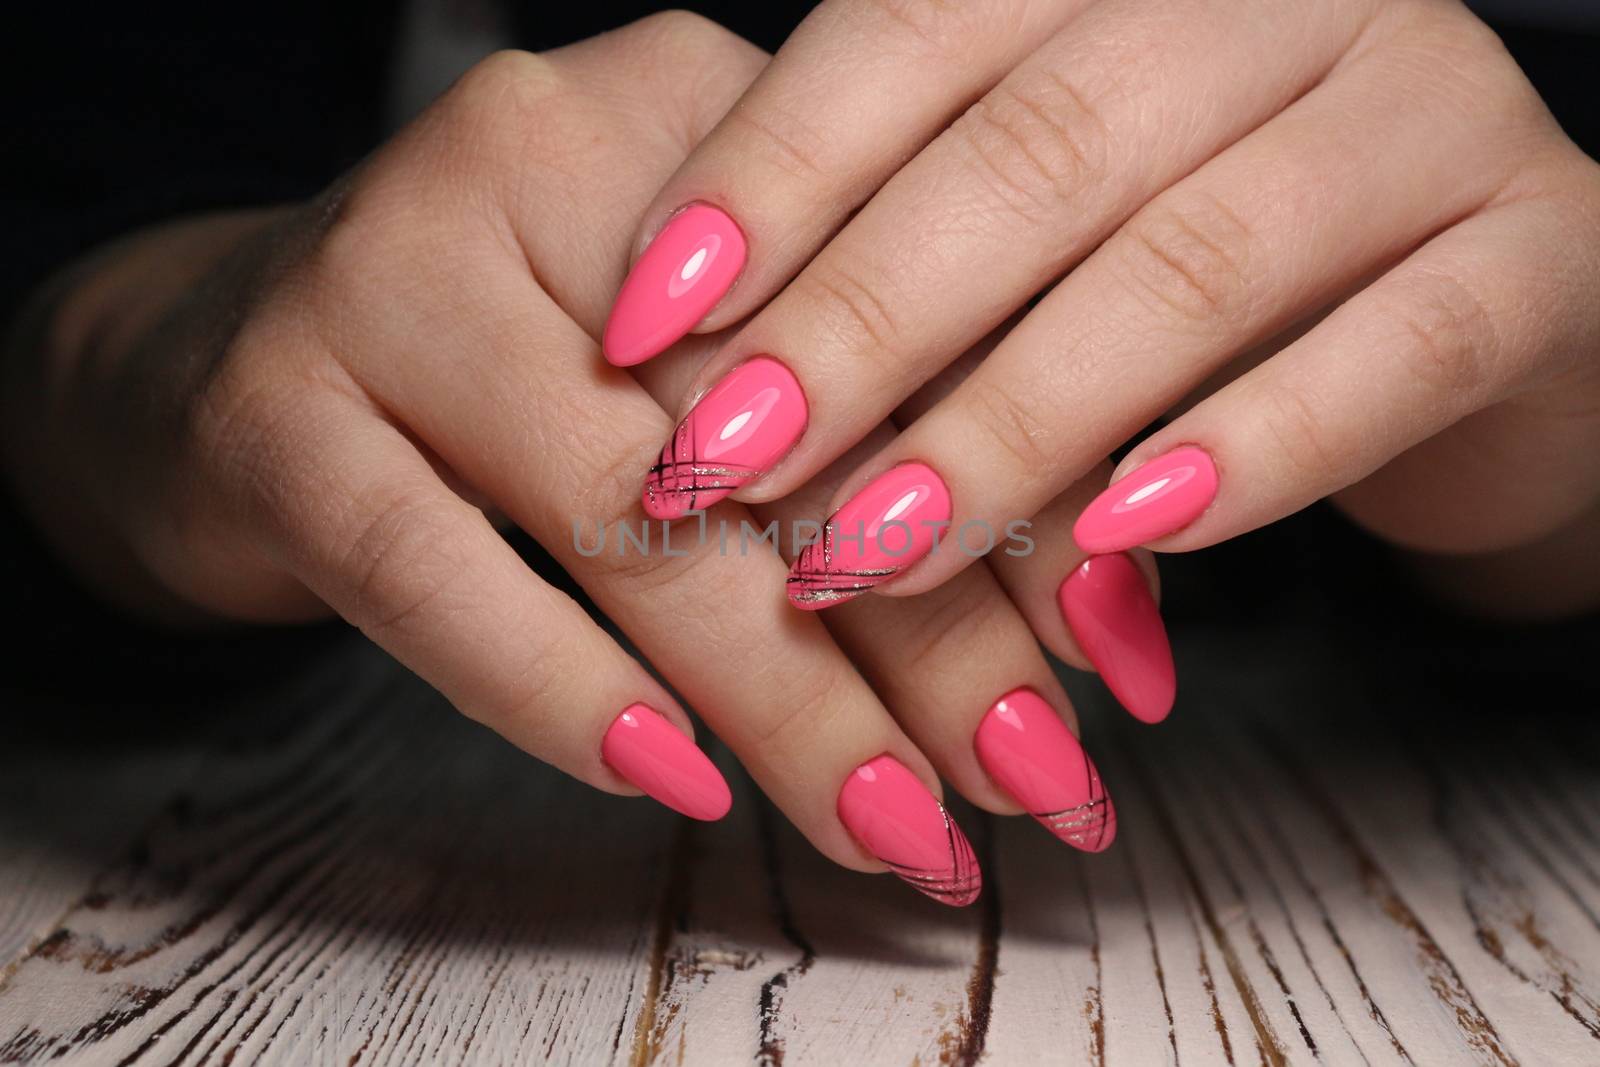 glamorous manicure of nails by SmirMaxStock